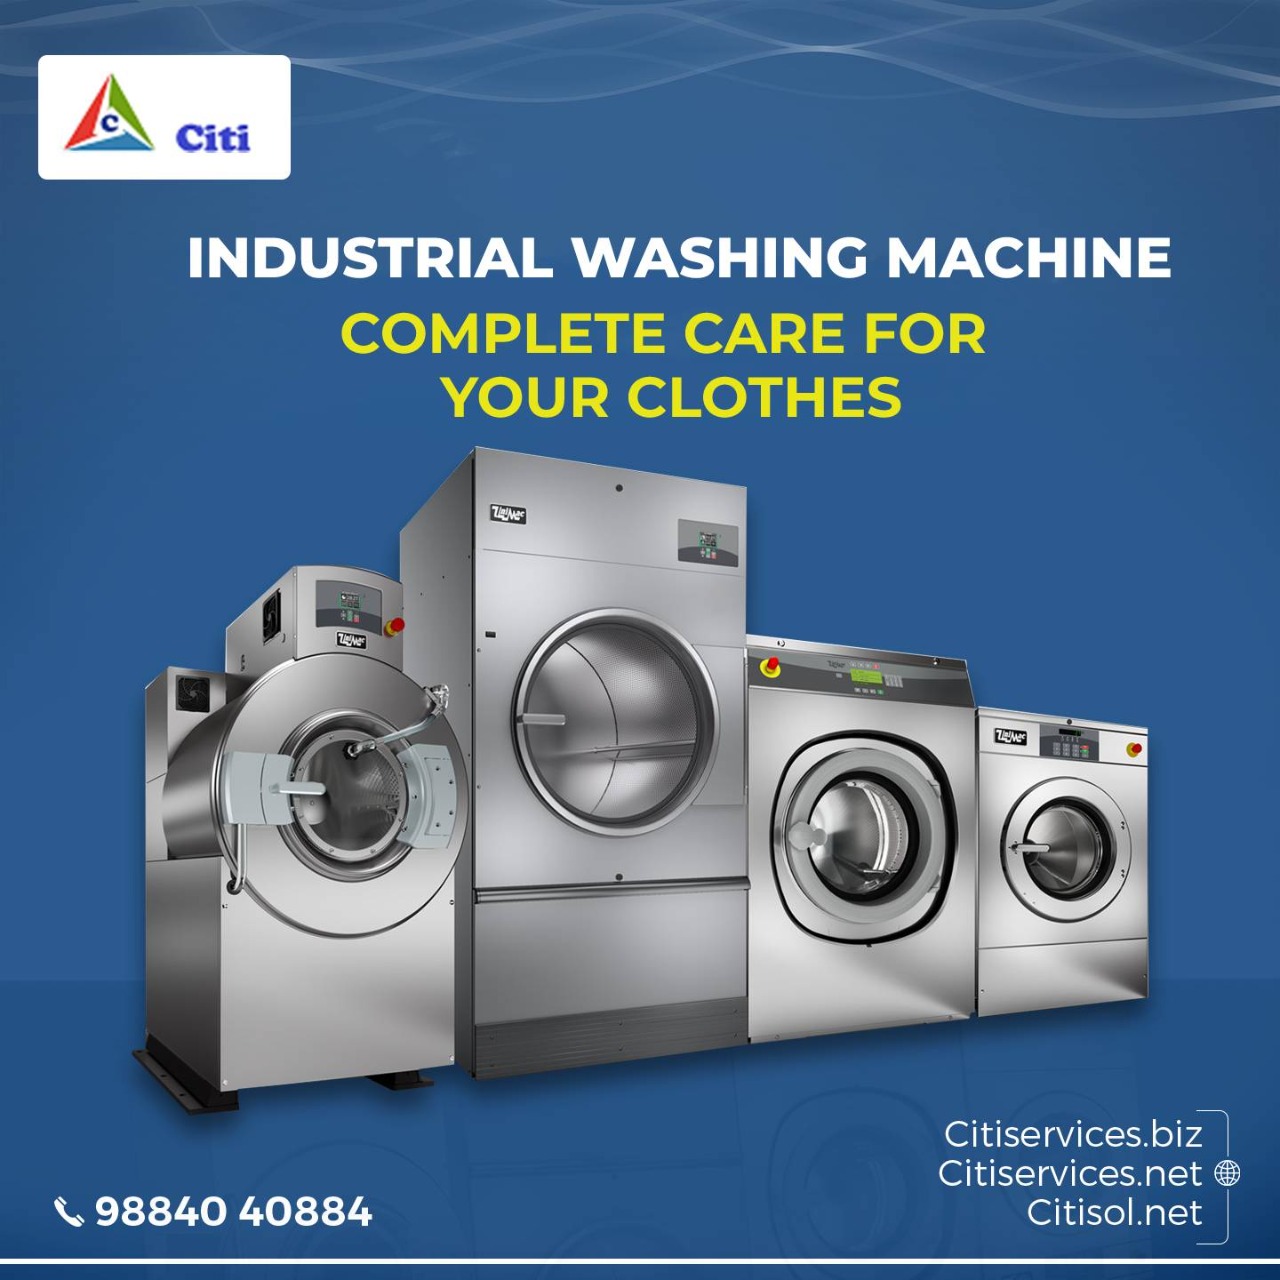 Industrial Washing Machine - COMPLETE CARE FOR YOUR CLOTHES